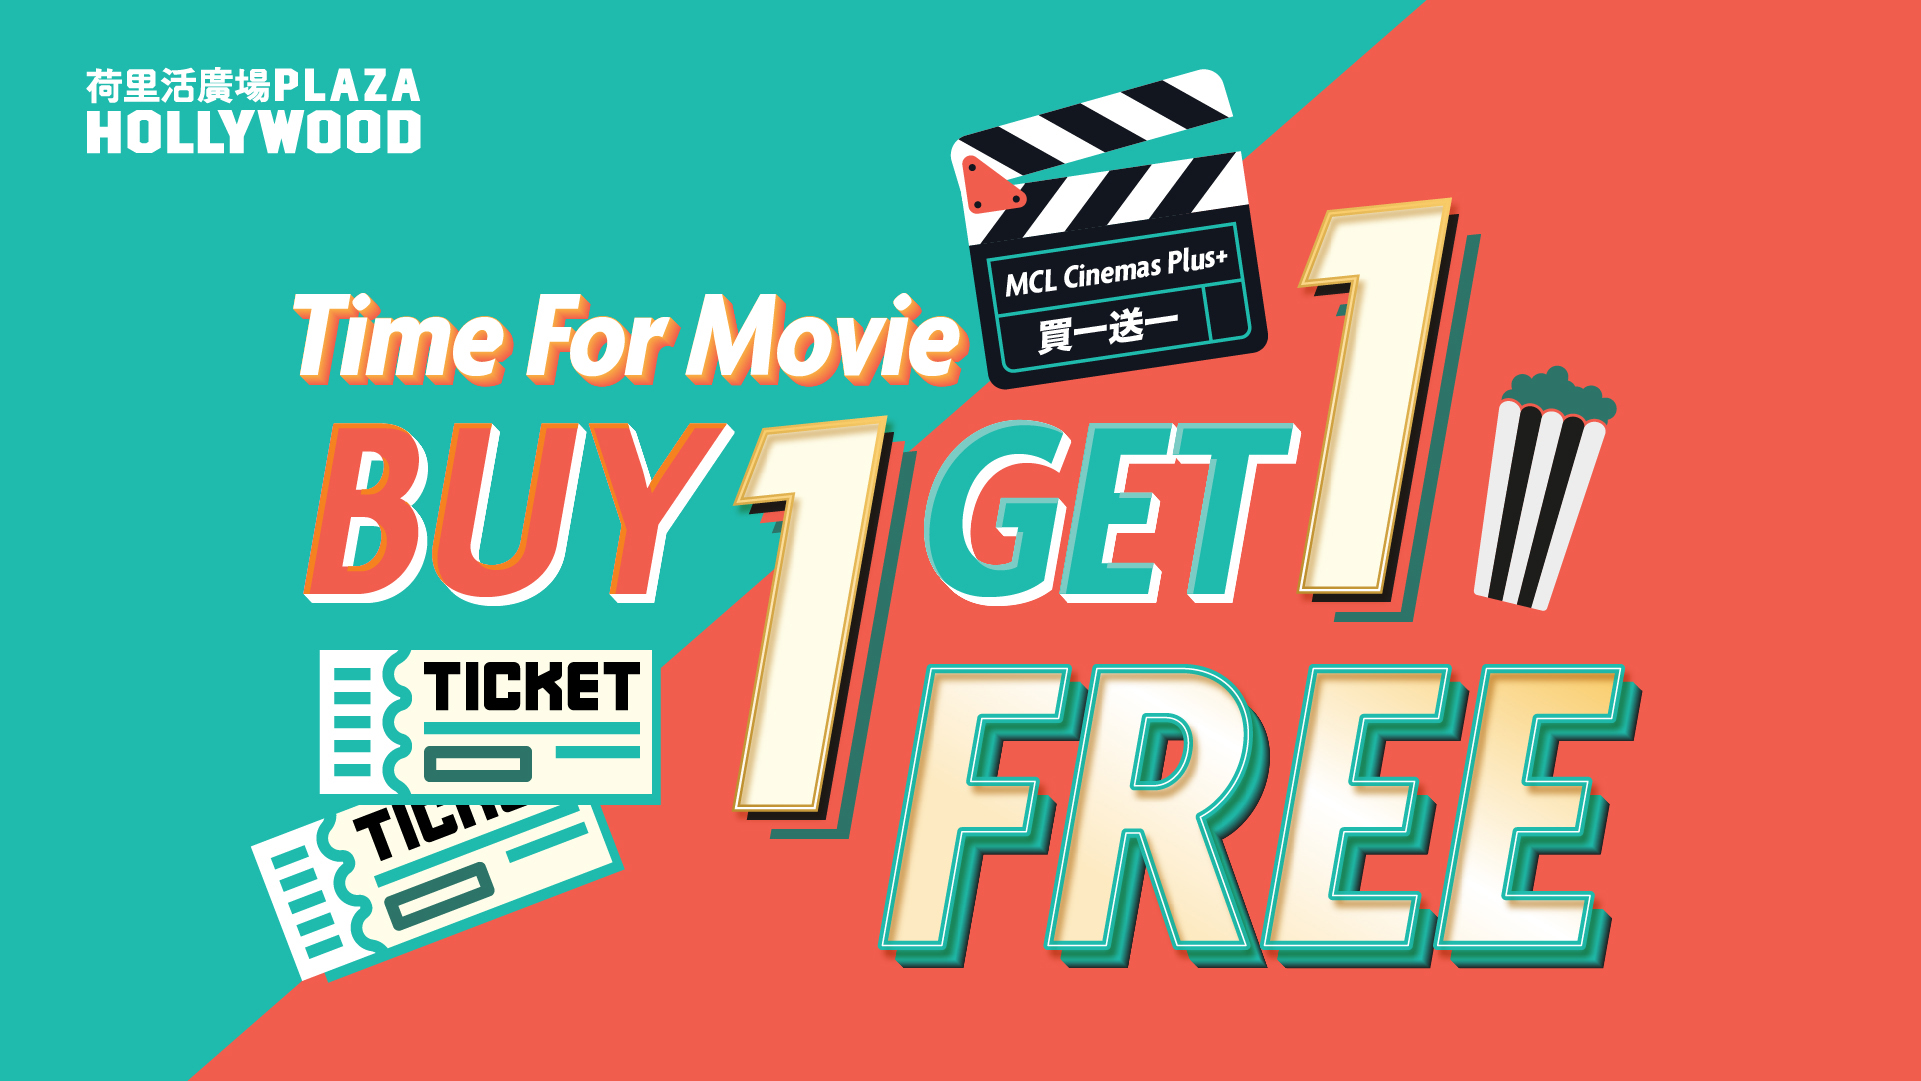 Time for Movie Buy 1 Get 1 Free